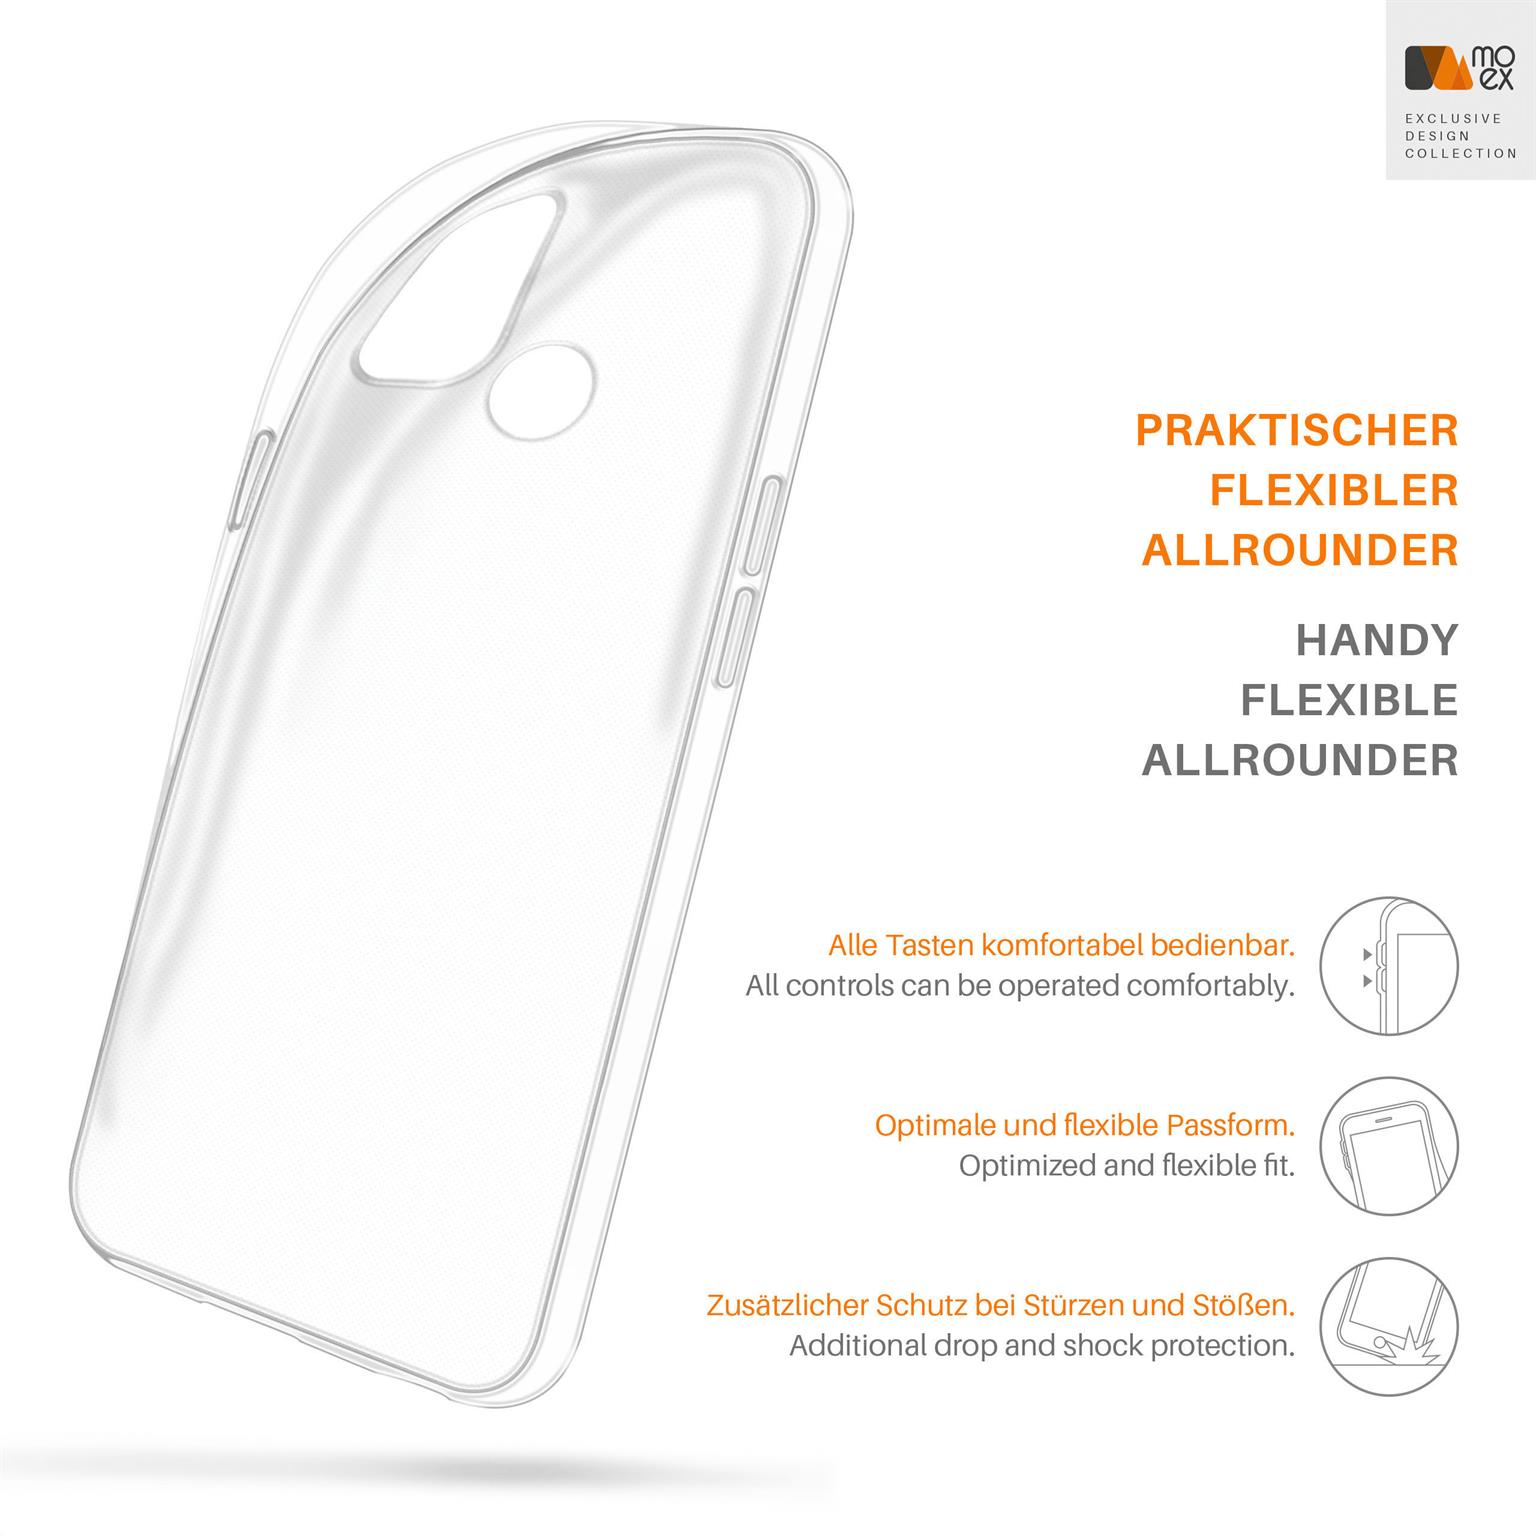 Aero Case, MOEX Backcover, Nord N100, Crystal-Clear OnePlus,